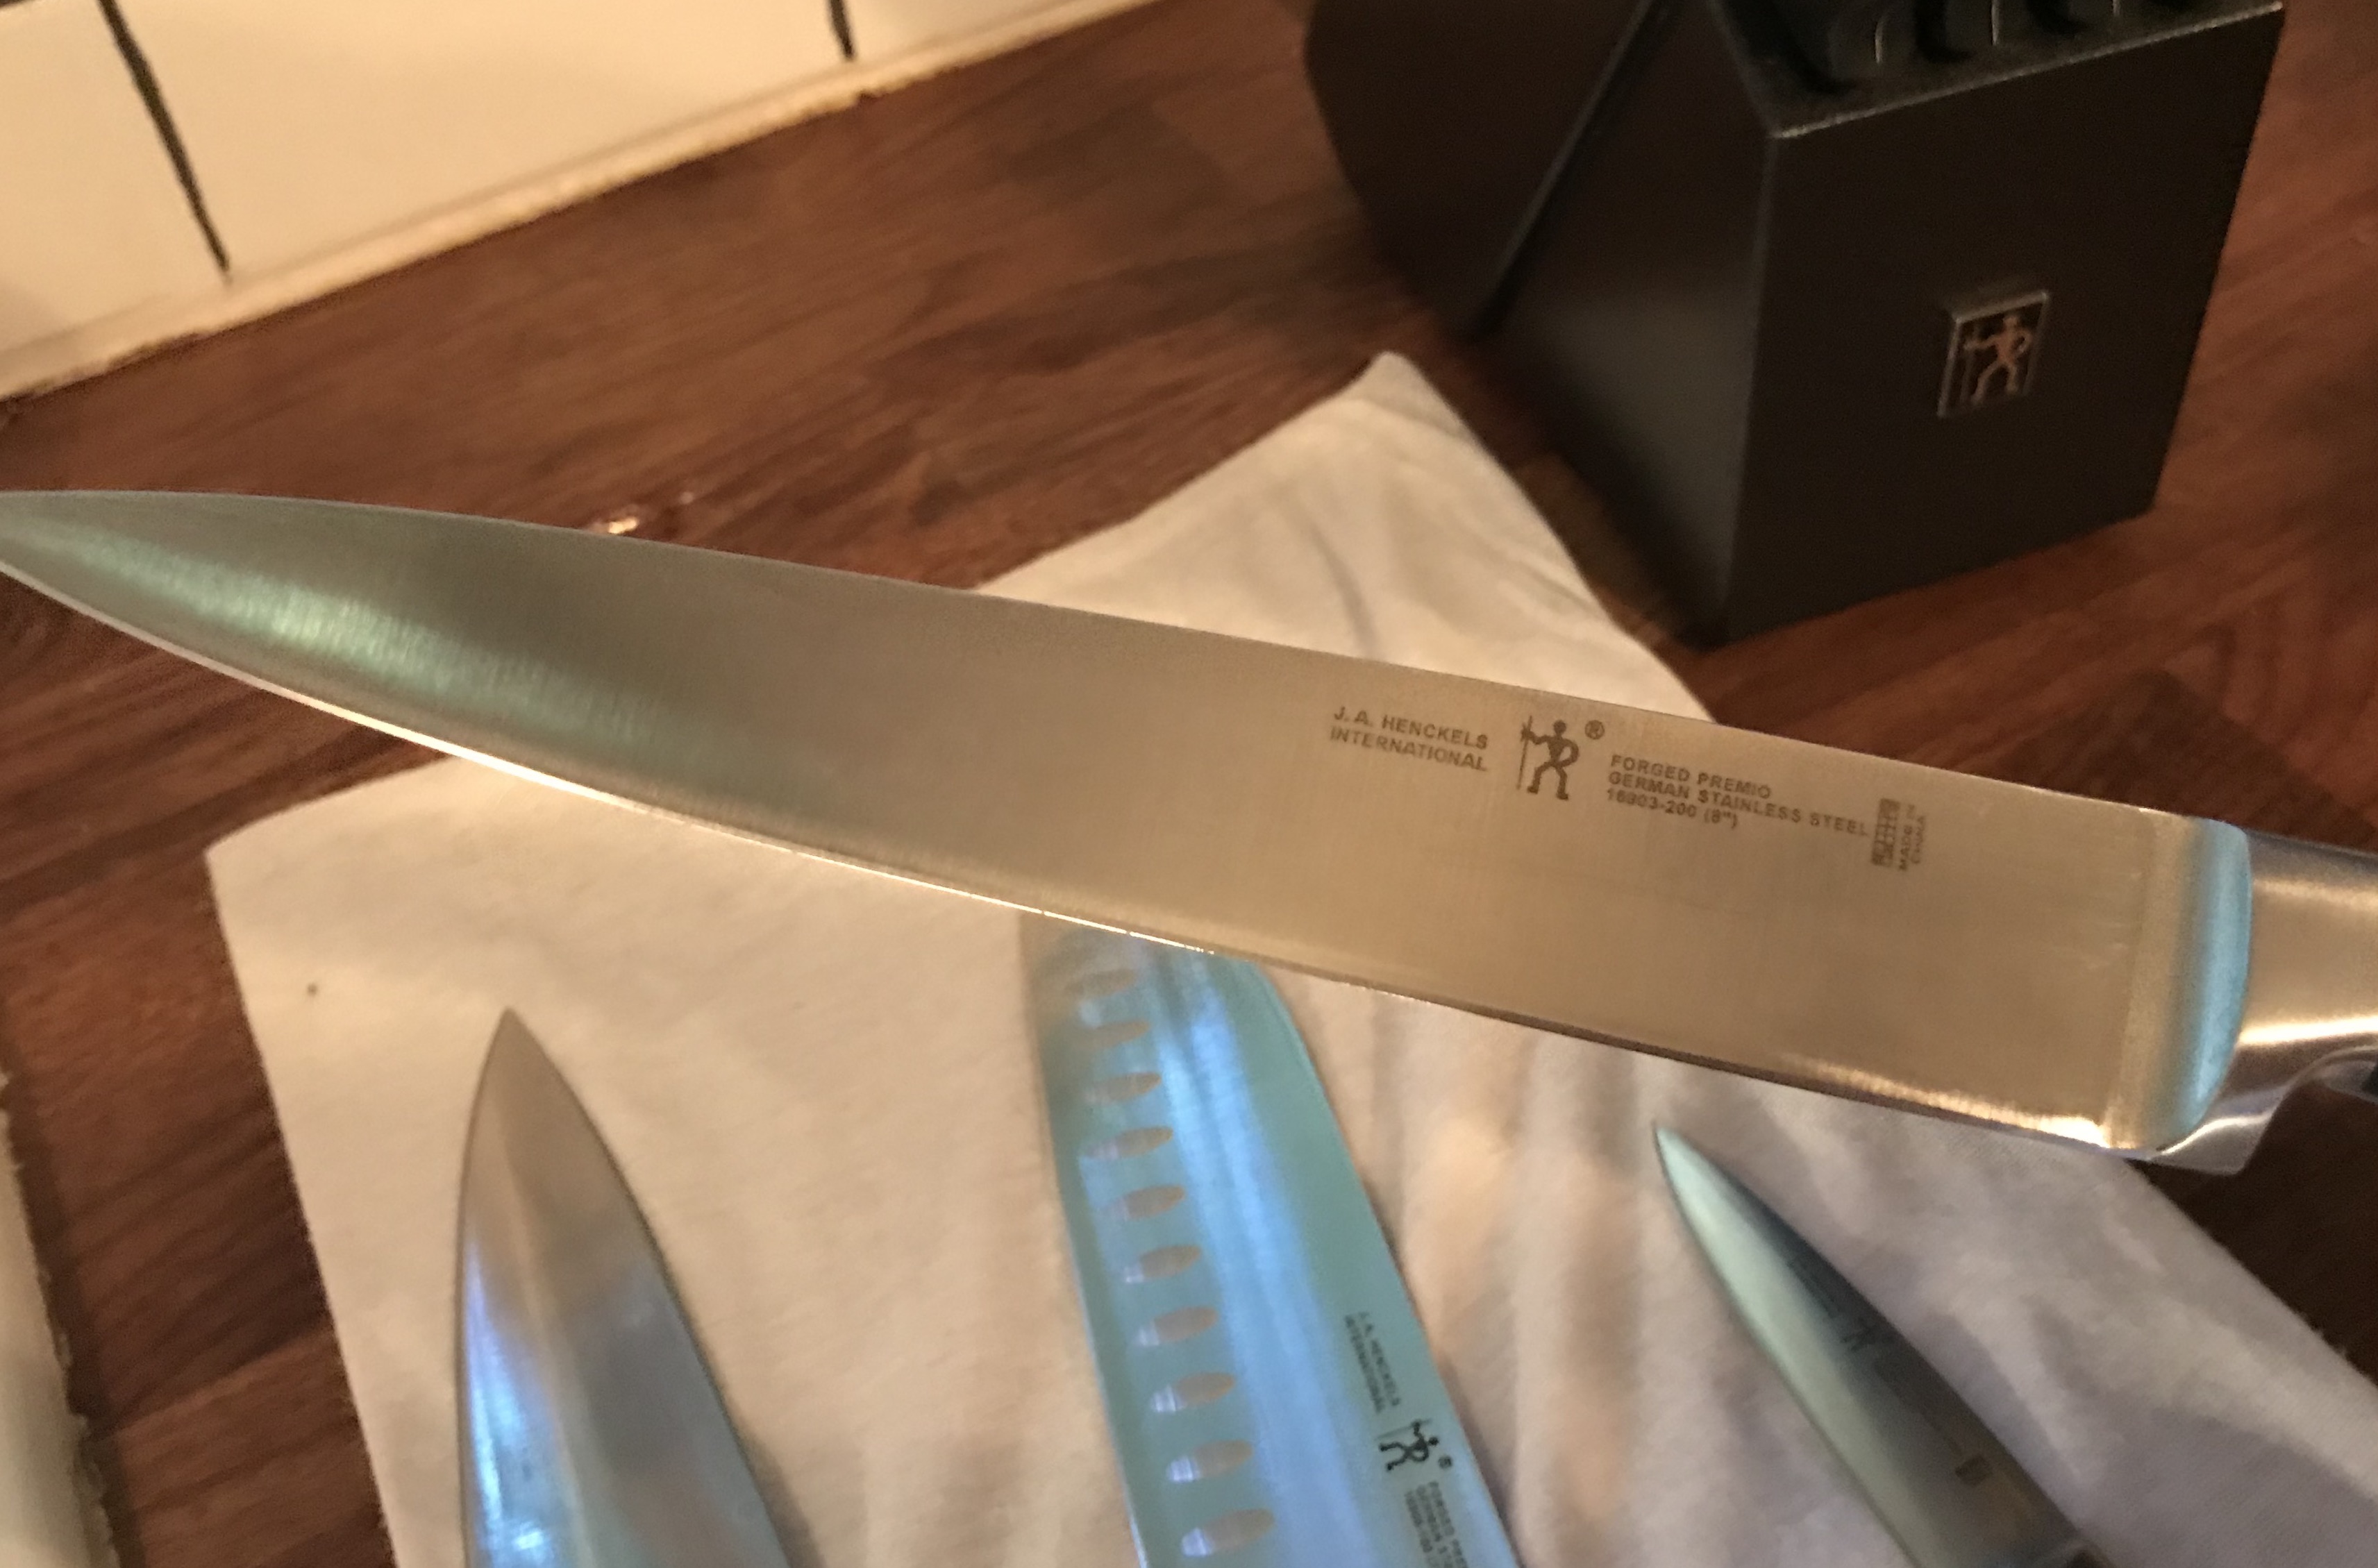 J.A.Henckels Carving Knife review